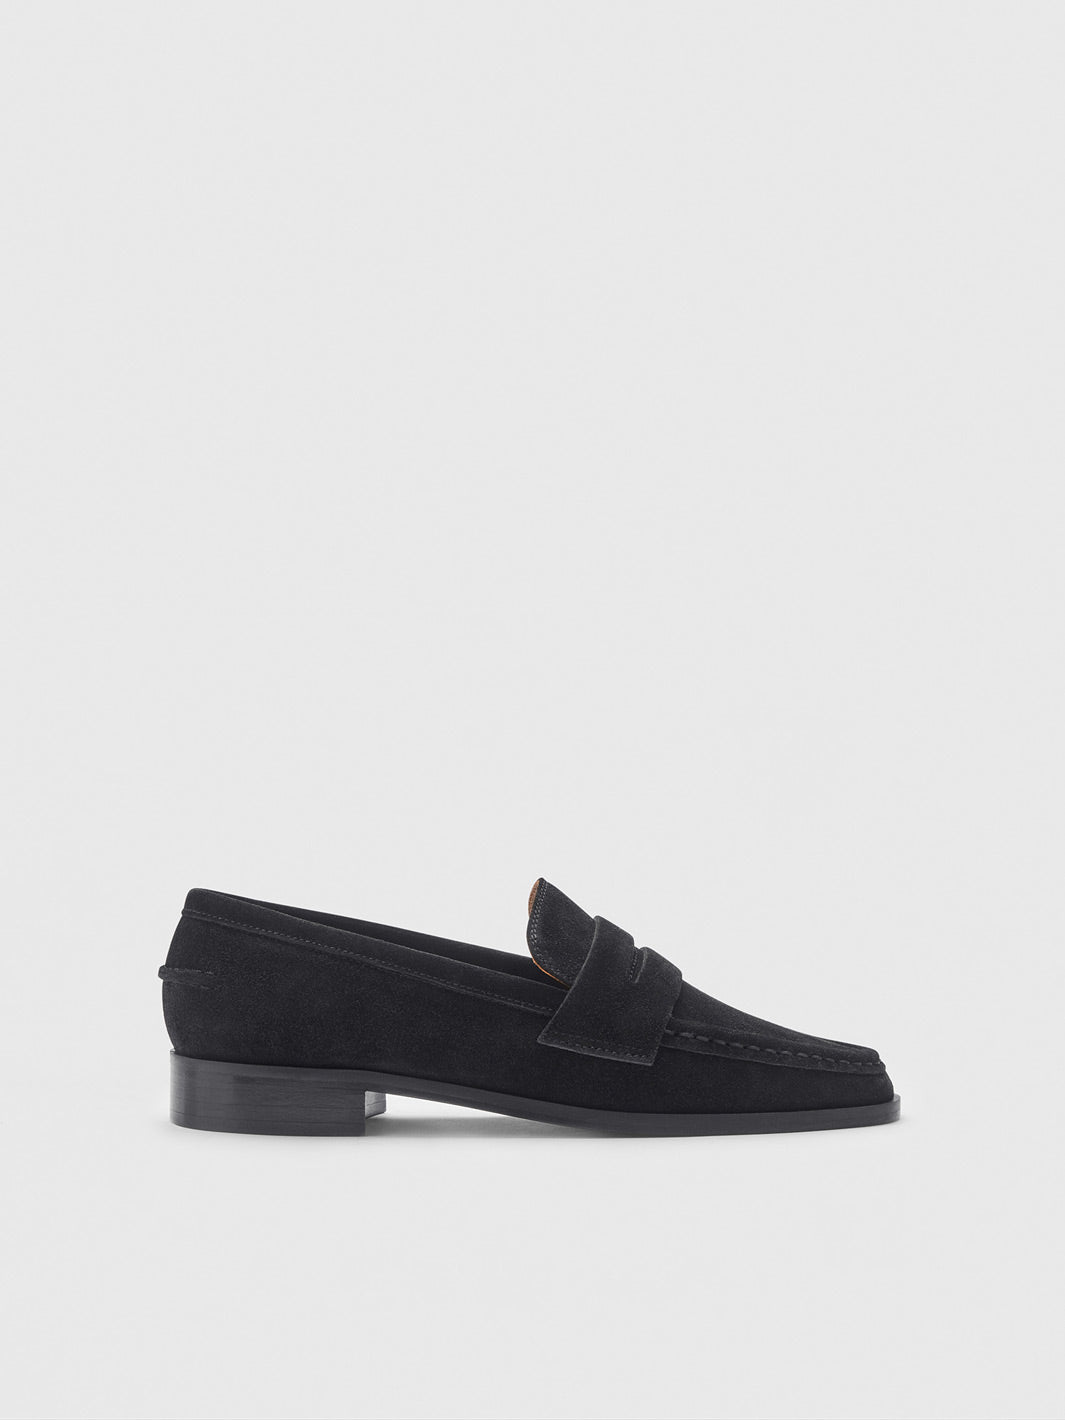 Airola Black Suede Loafers